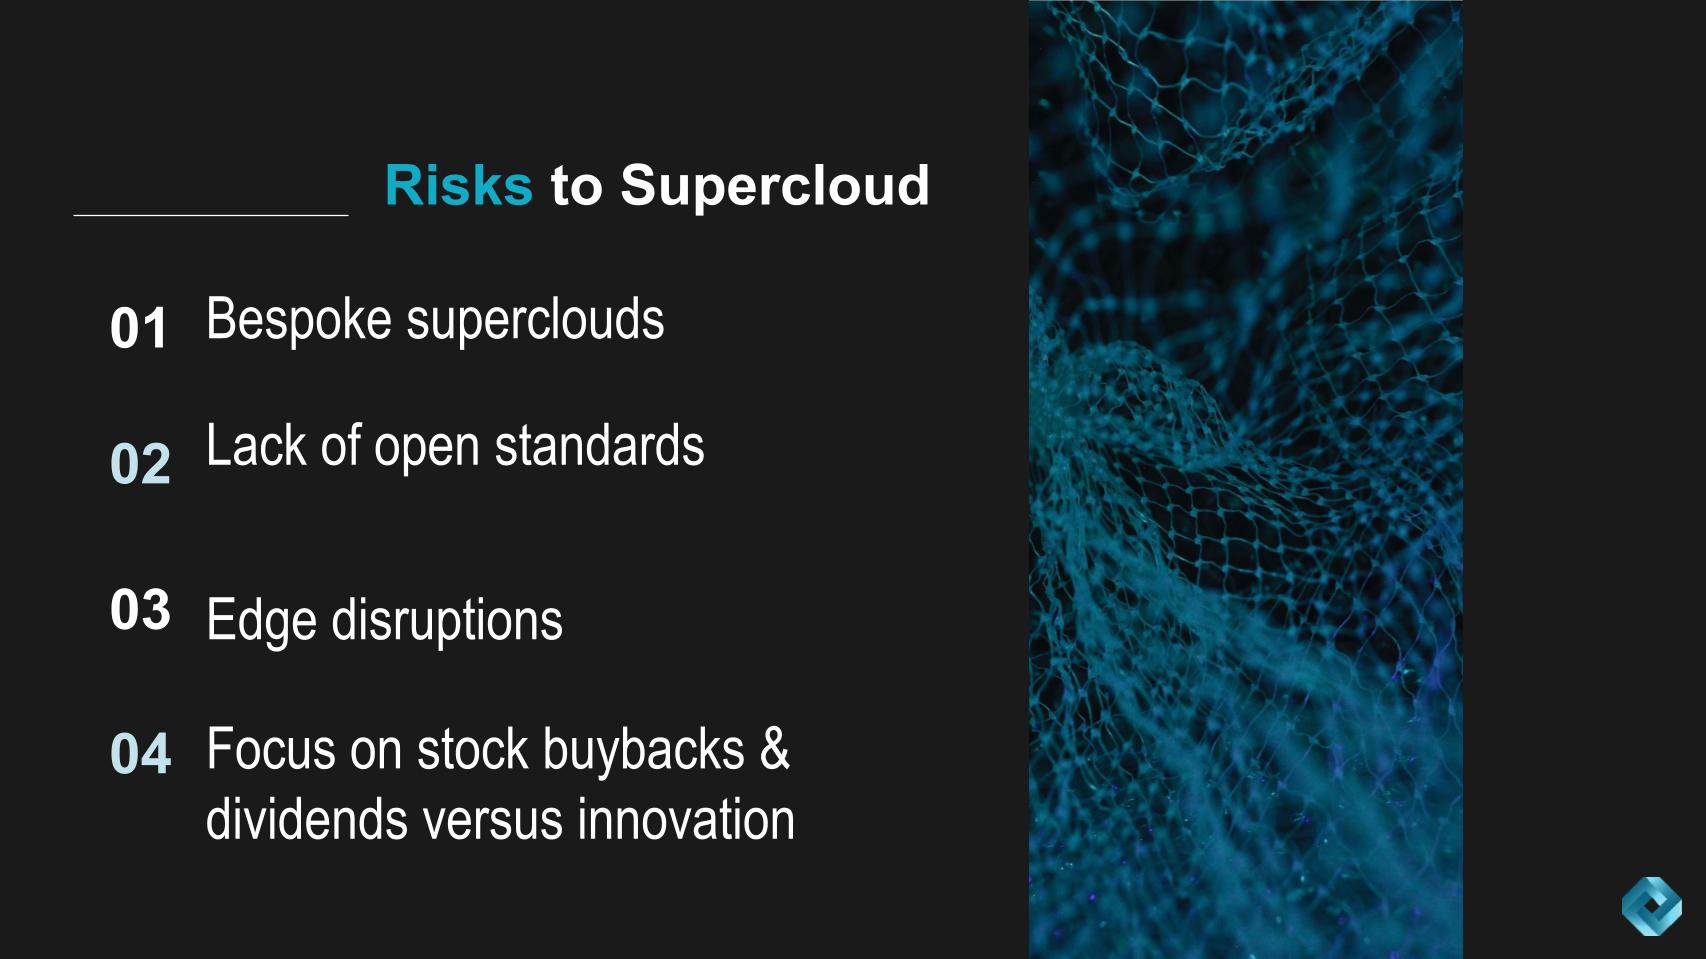 Risks to supercloud